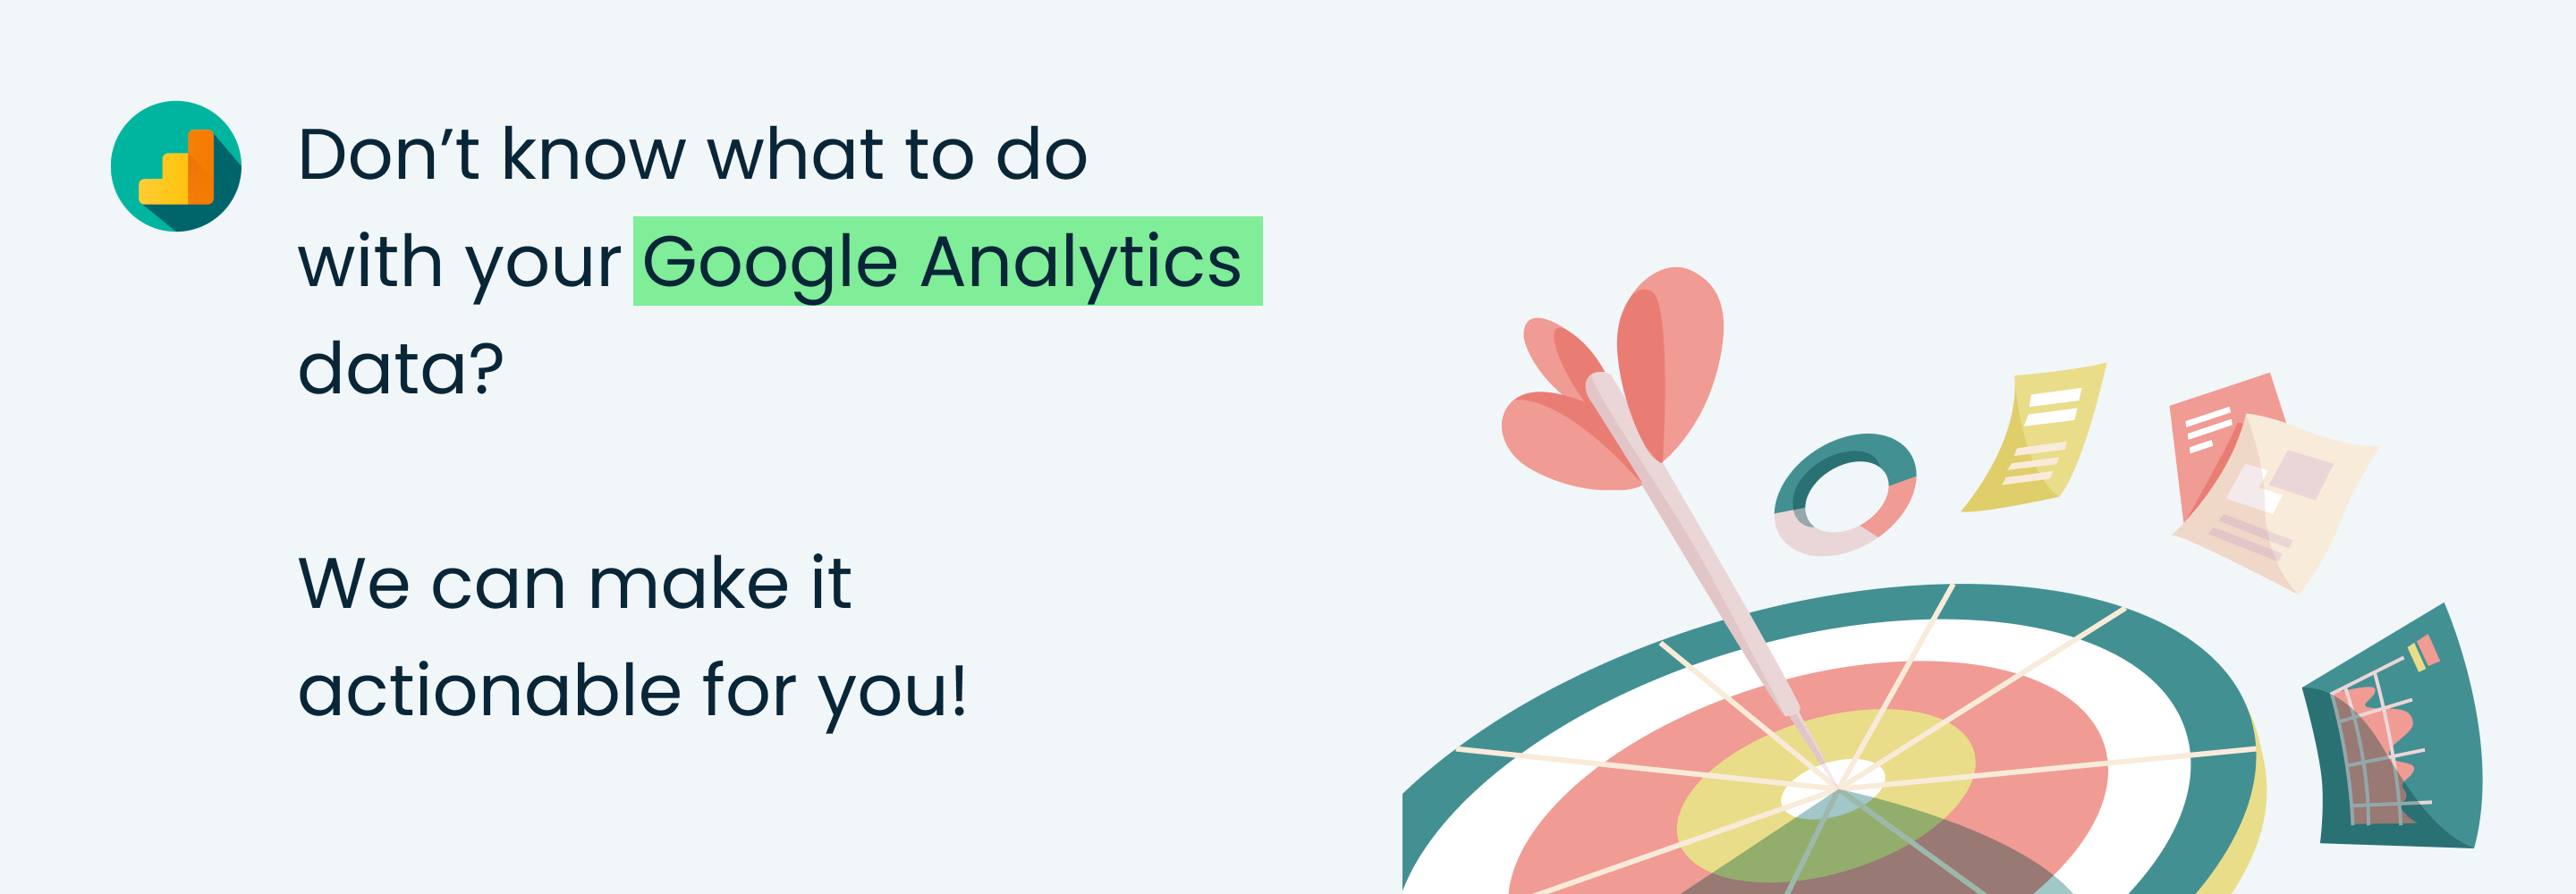 Don’t know what to do with your Google Analytics data?